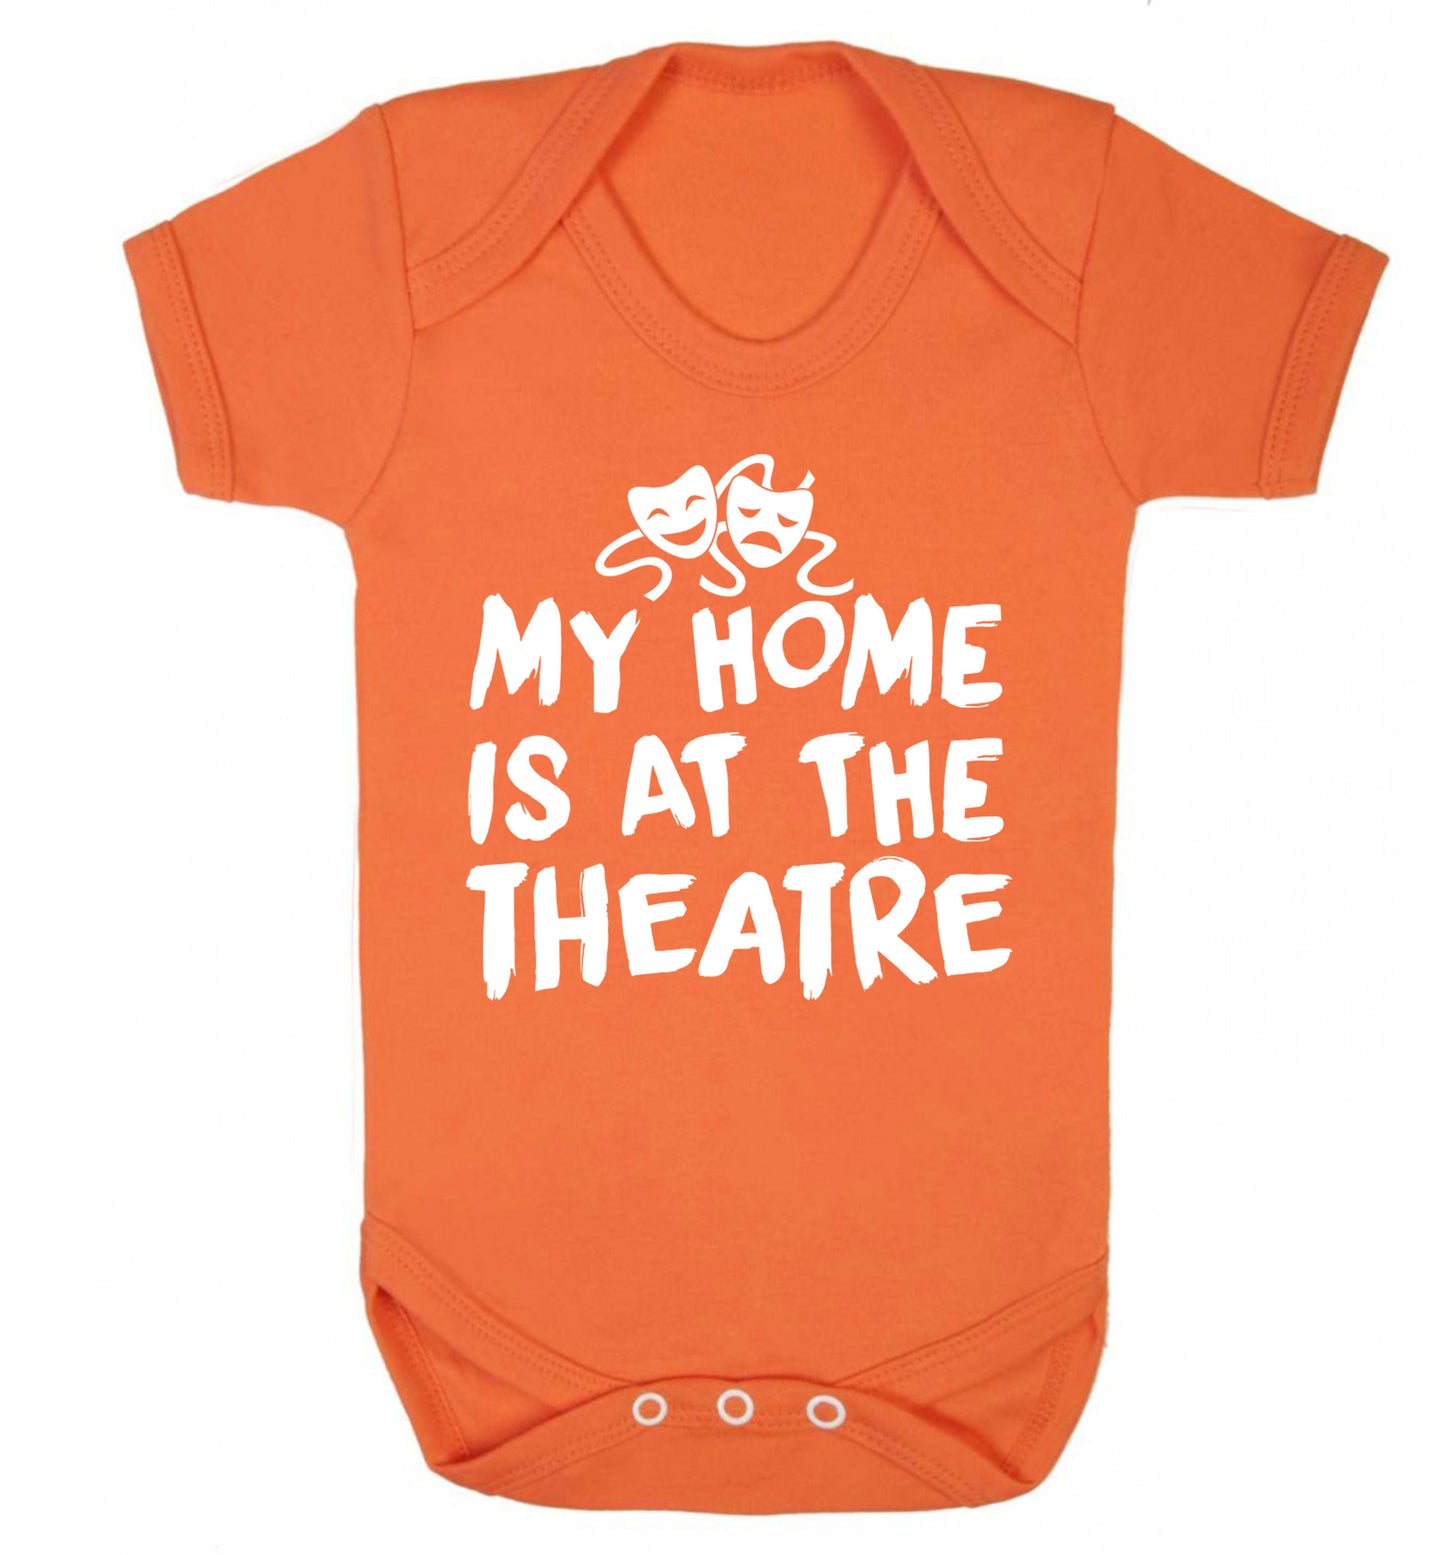 My home is at the theatre Baby Vest orange 18-24 months